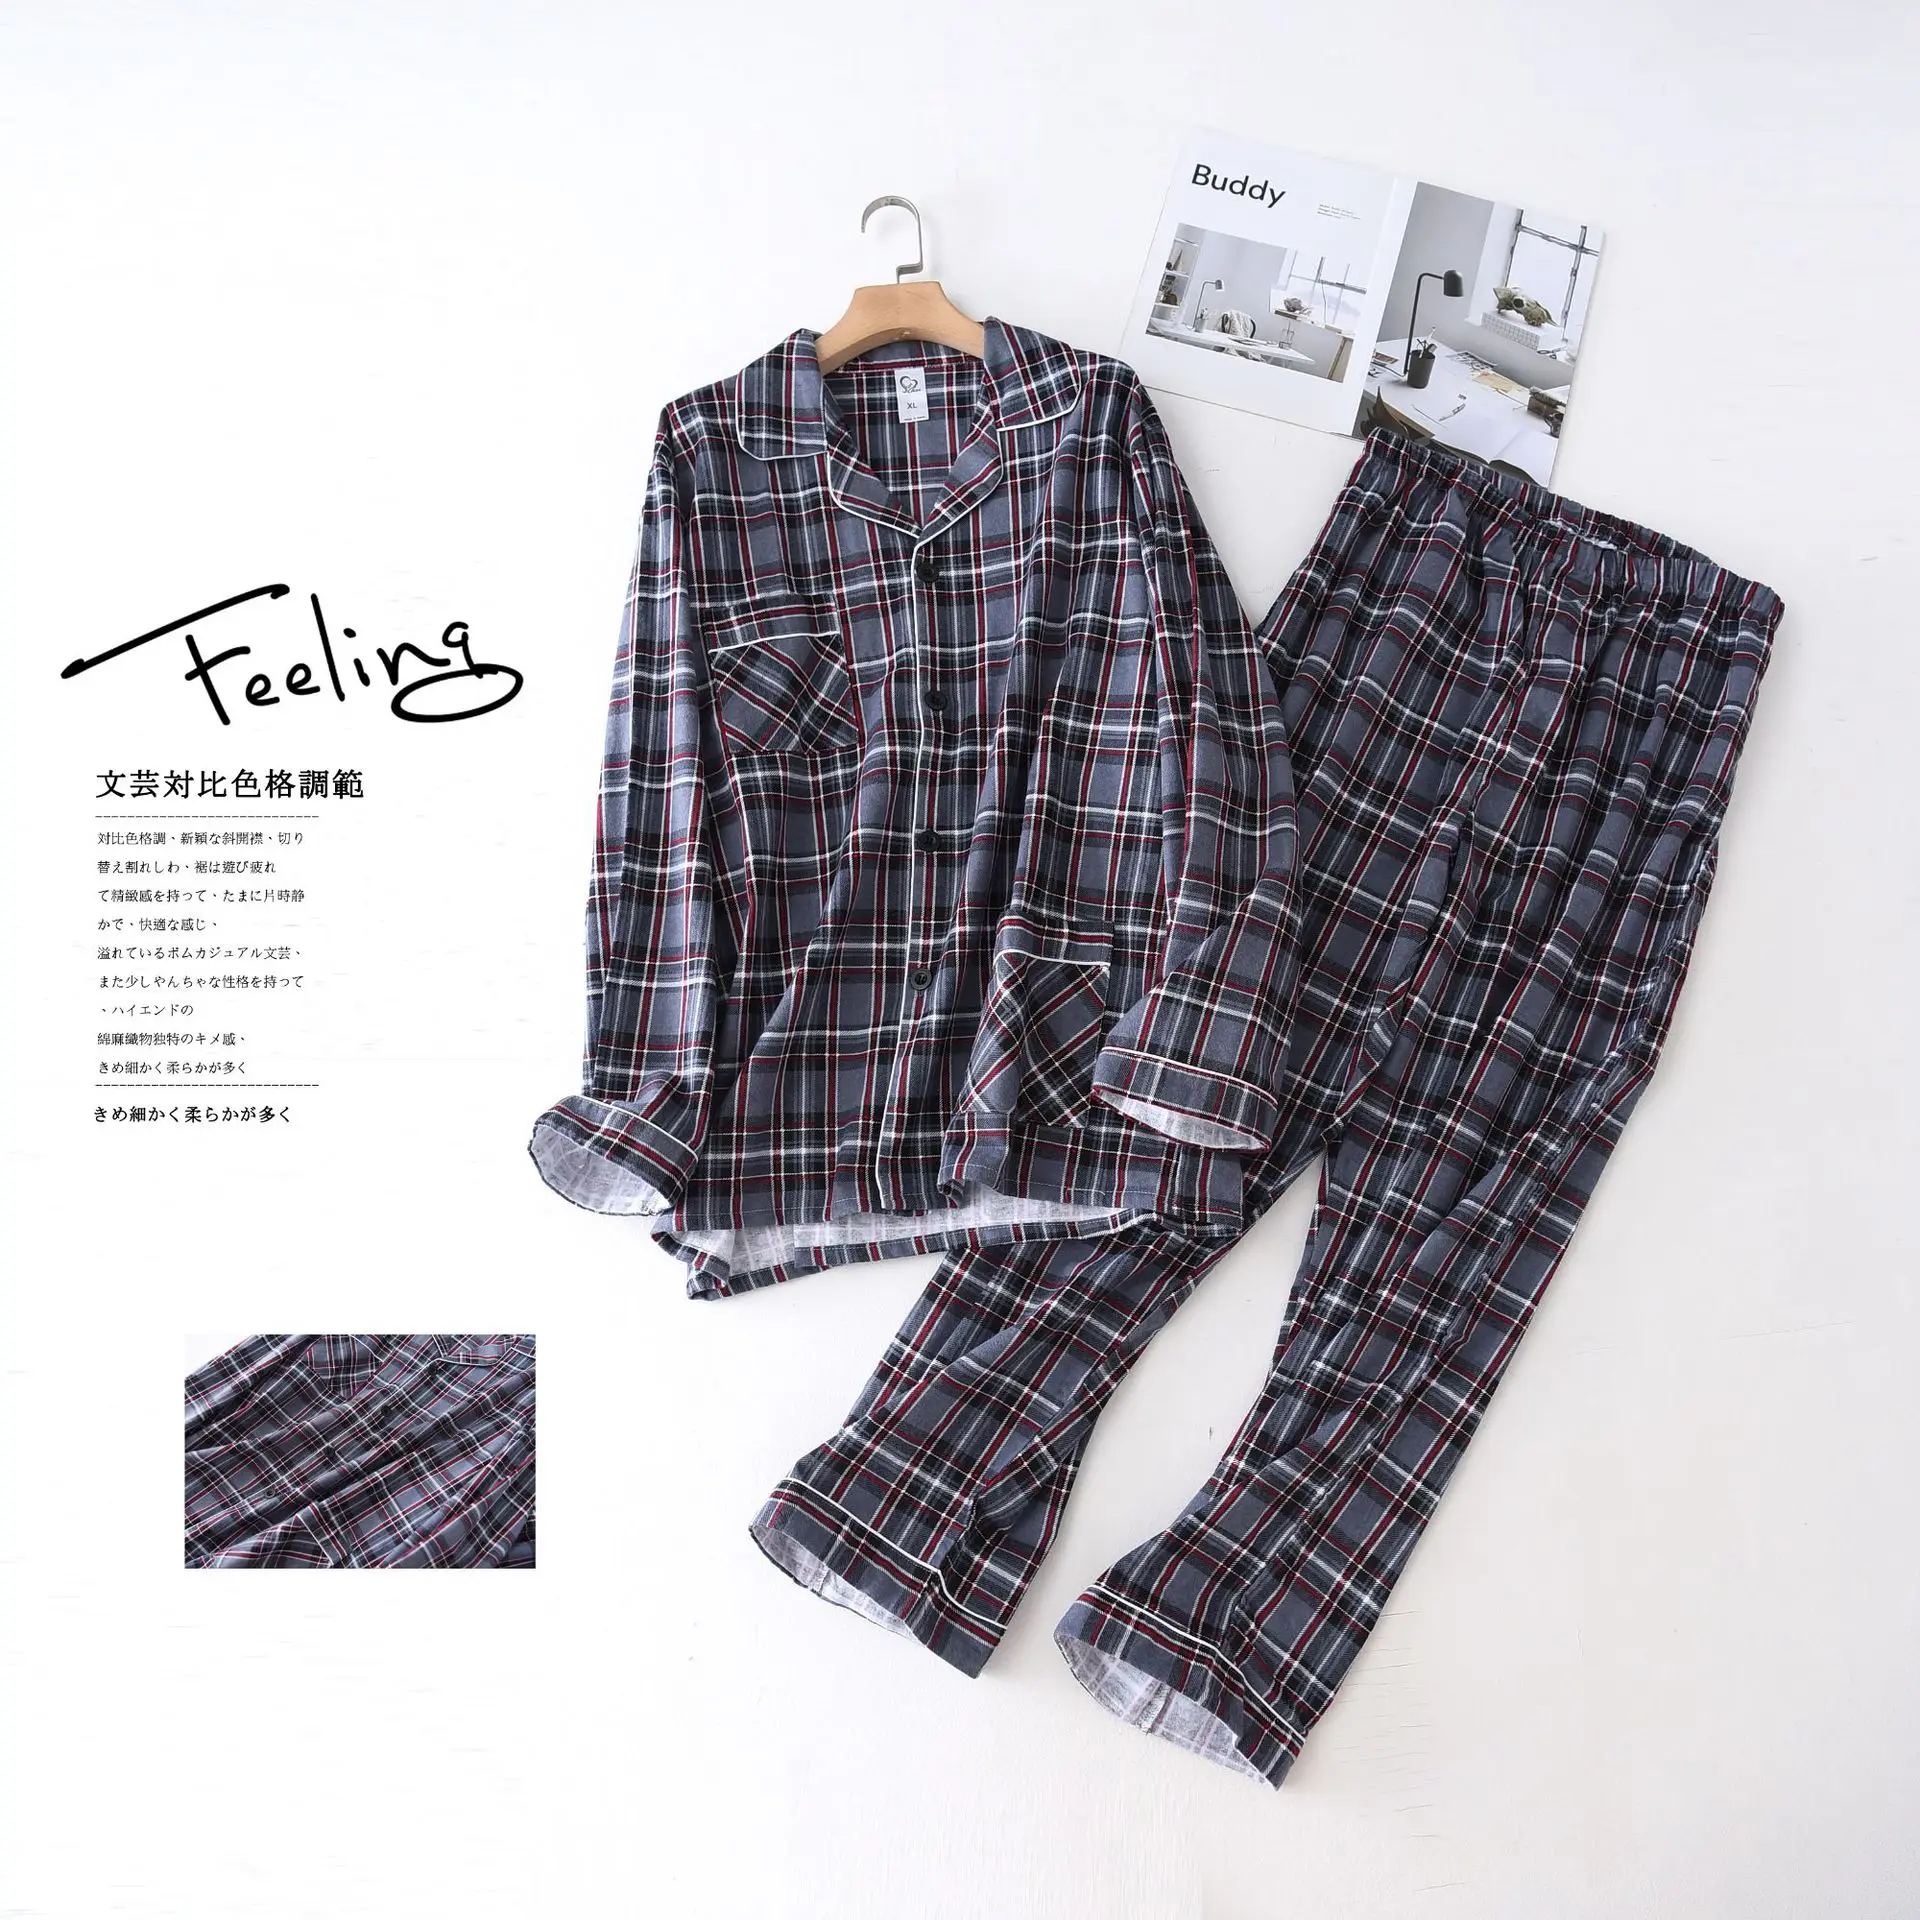 black silk pajamas Spring Autumn and Winter Men's Pajamas Long-sleeved Trousers Suit Cotton Brushed Cloth Homewear Men's Pajamas Set cotton pajamas for men